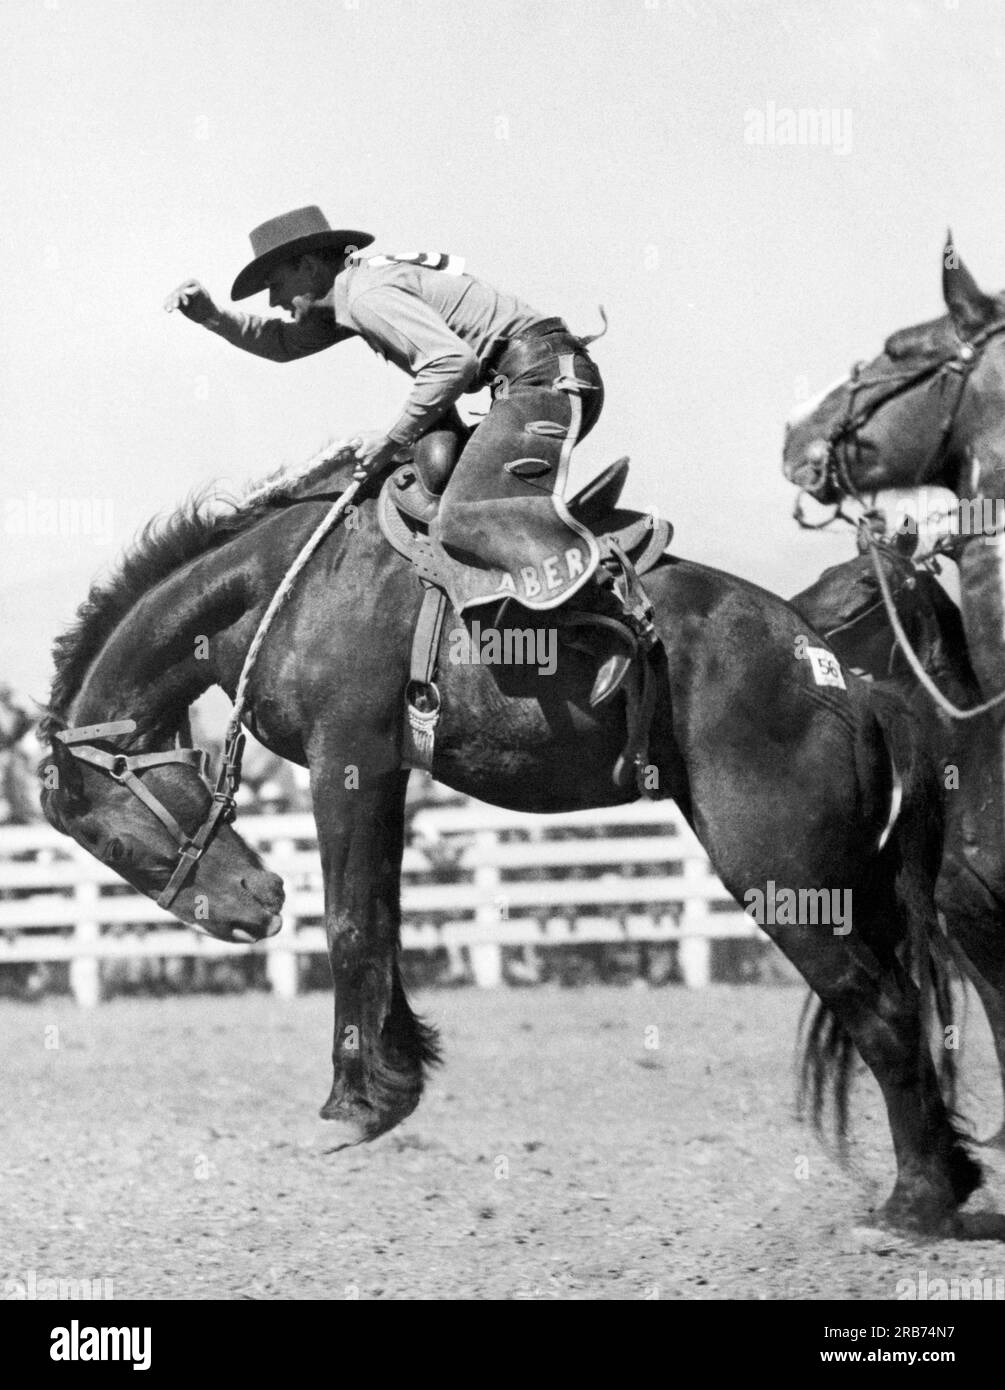 Salinas, California:  1936. Cowmen term this stiff-legged buck the worst of all, where the bronco plunges up and down, landing with the front legs stiff. It appears here at the California Rodeo that rider Dolph Aber is finding it plenty tough, with a tumble in the offing. Stock Photo